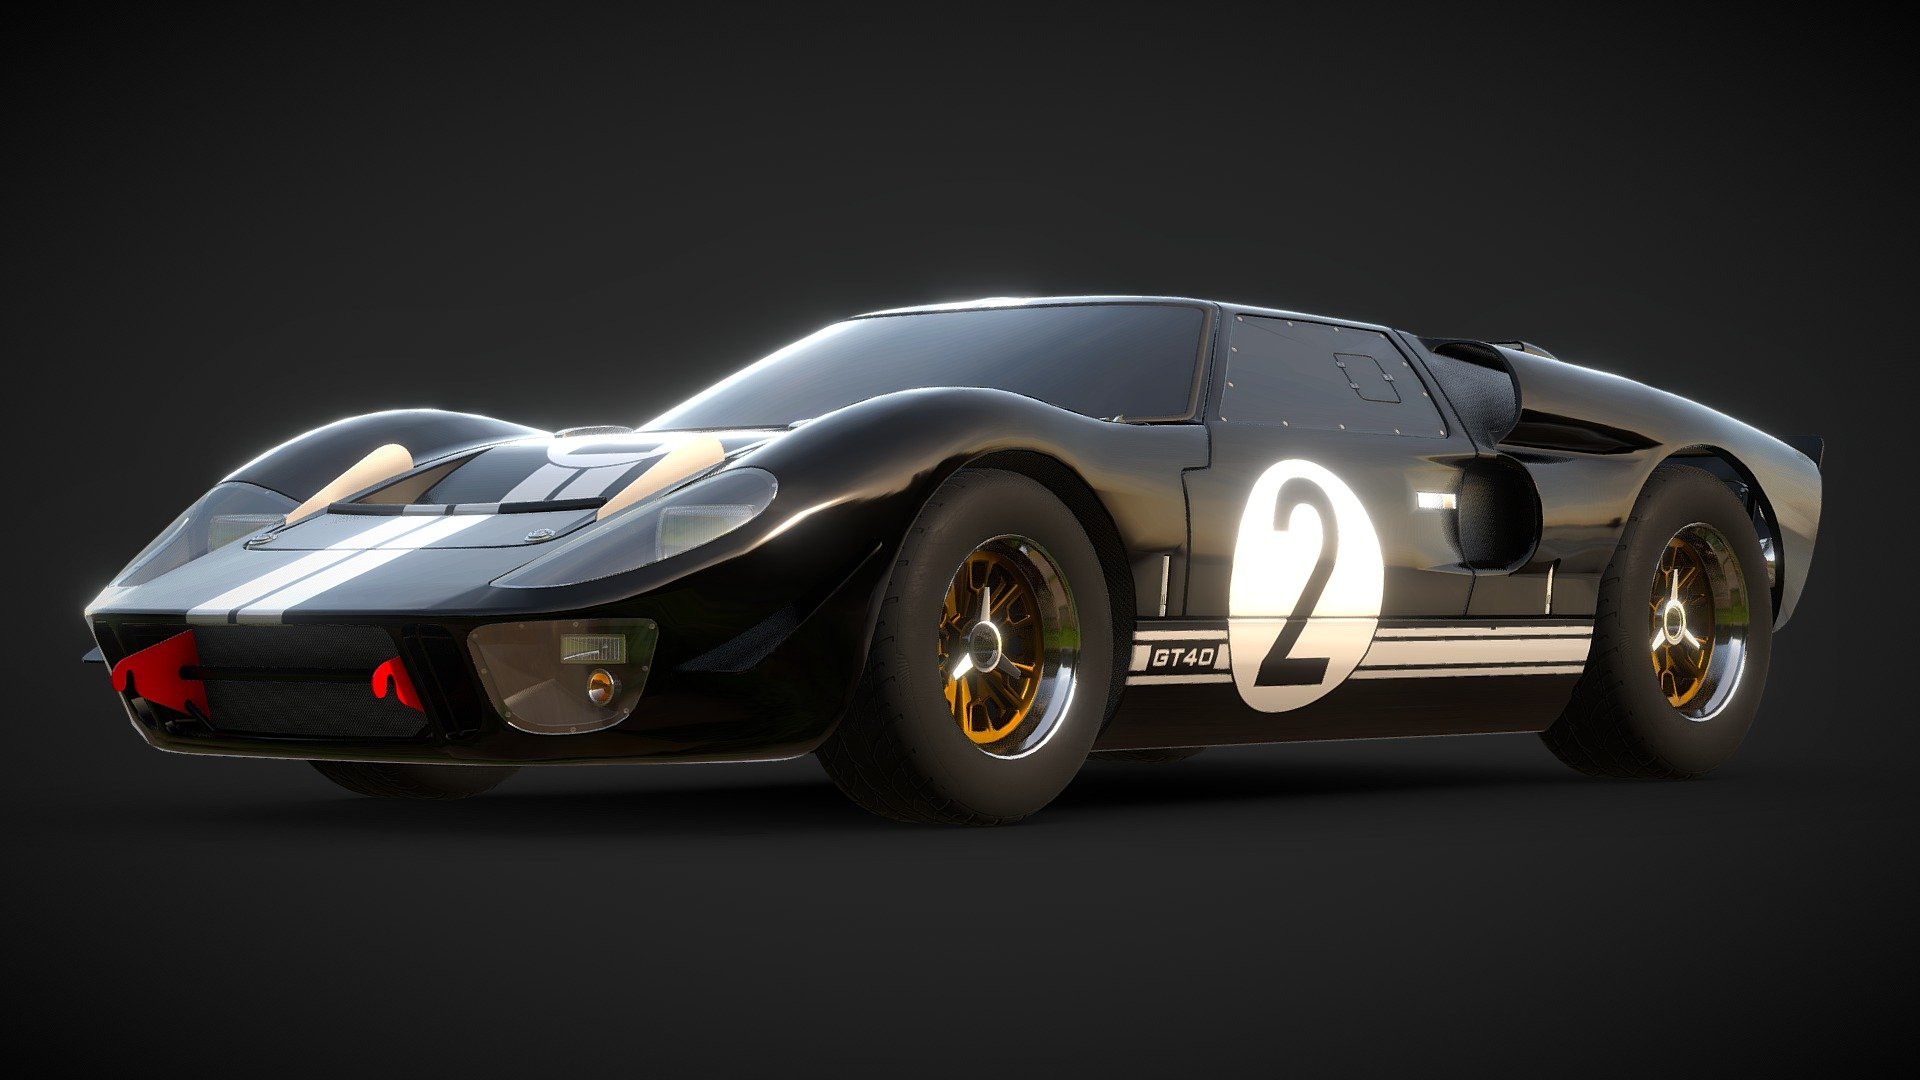 Ford GT40 Mk II - Mid Poly
Game Ready / Unreal Engine / Unity - Directly import with texture maps and start using.
Contact me if you want the non triangulated version of this model - dsaalister@gmail.com
https://www.instagram.com/p/Cdnk5jajFgl/?hl=en - Ford GT40 Mk II - Buy Royalty Free 3D model by Allay Design (@Alister.Dsa) 3d model